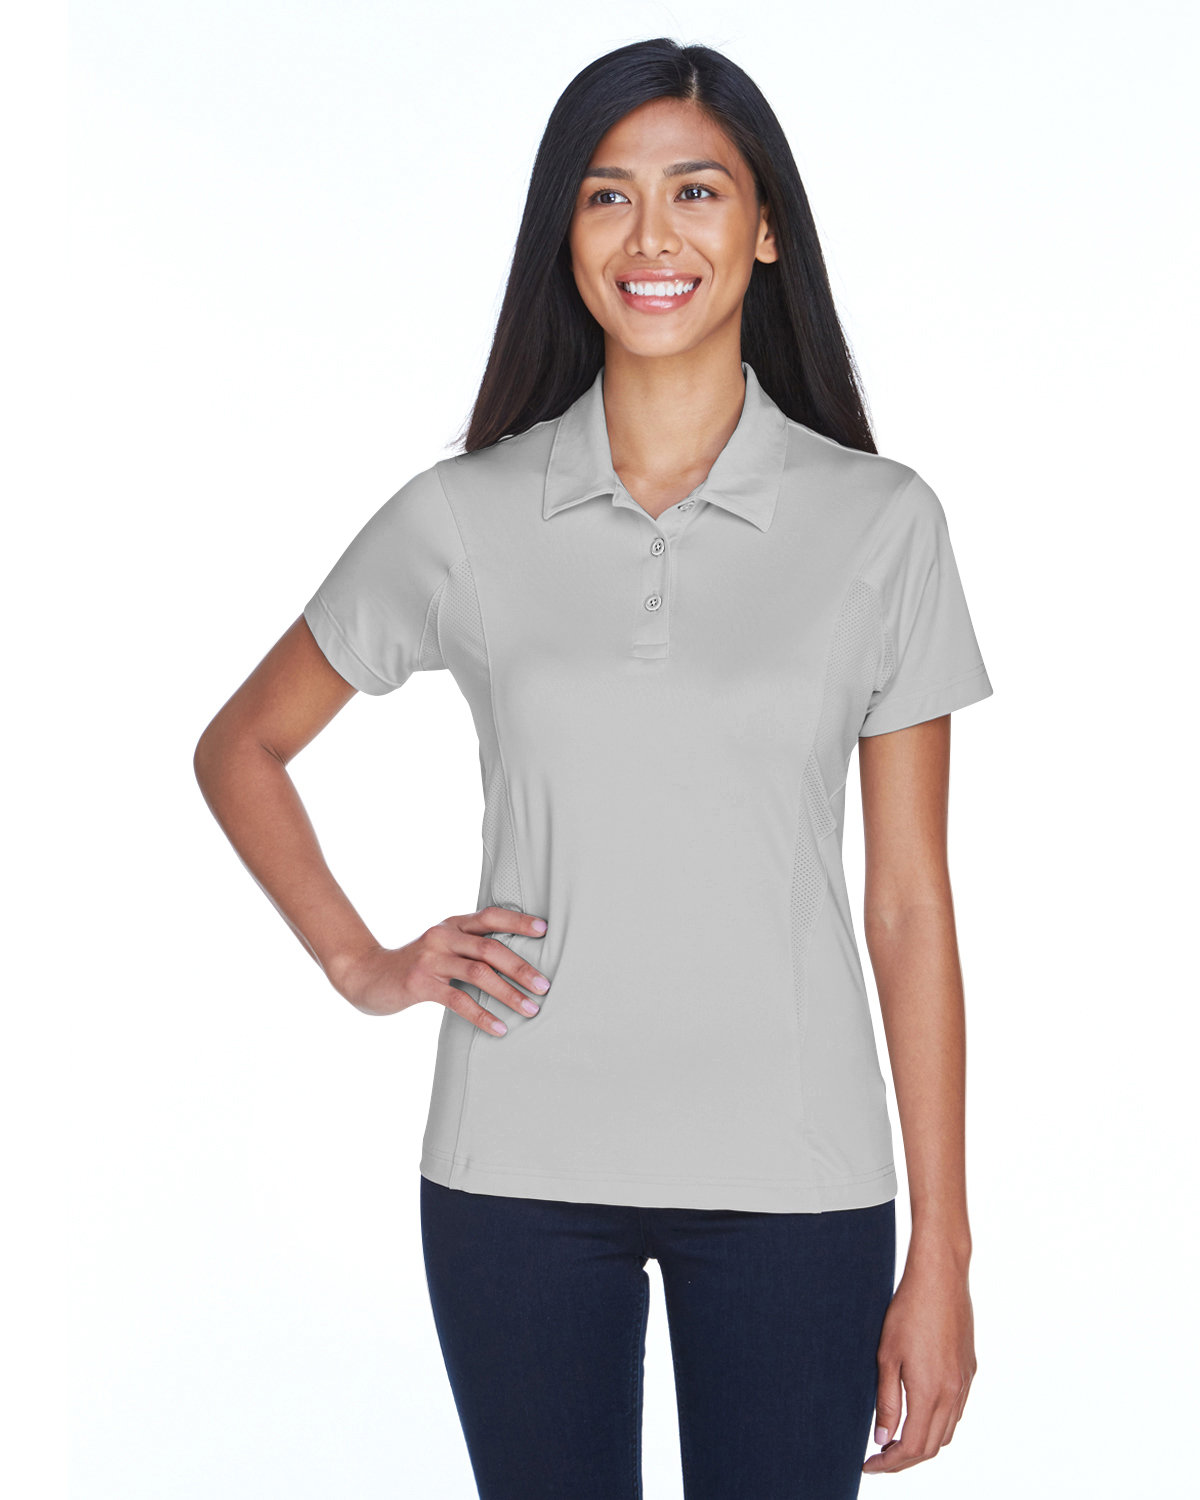 Ladies Charger Performance Polo-Team 365